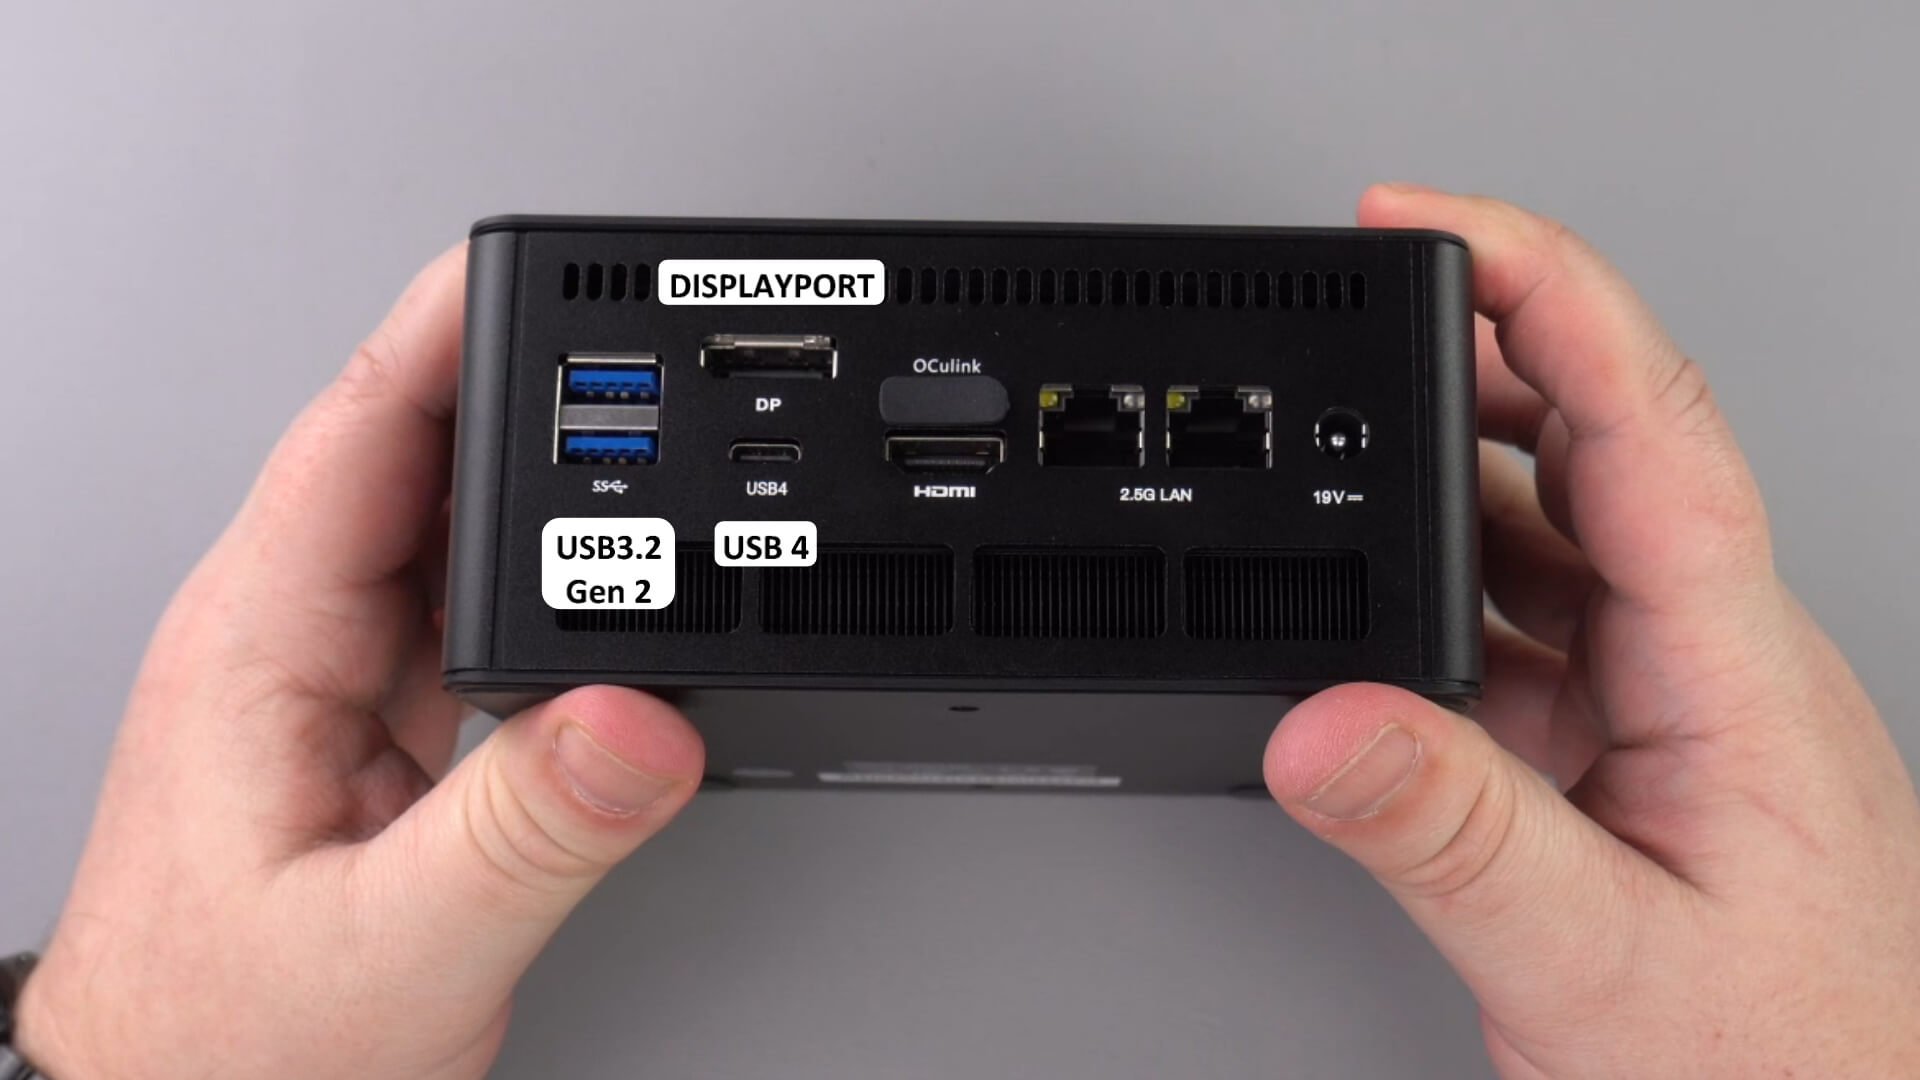 Retro Game Corps on X: New video! This is the MinisForum UM780 XTX, a  powerful mini PC with an OCulink port. Love the versatility of this one,  it's my new favorite among